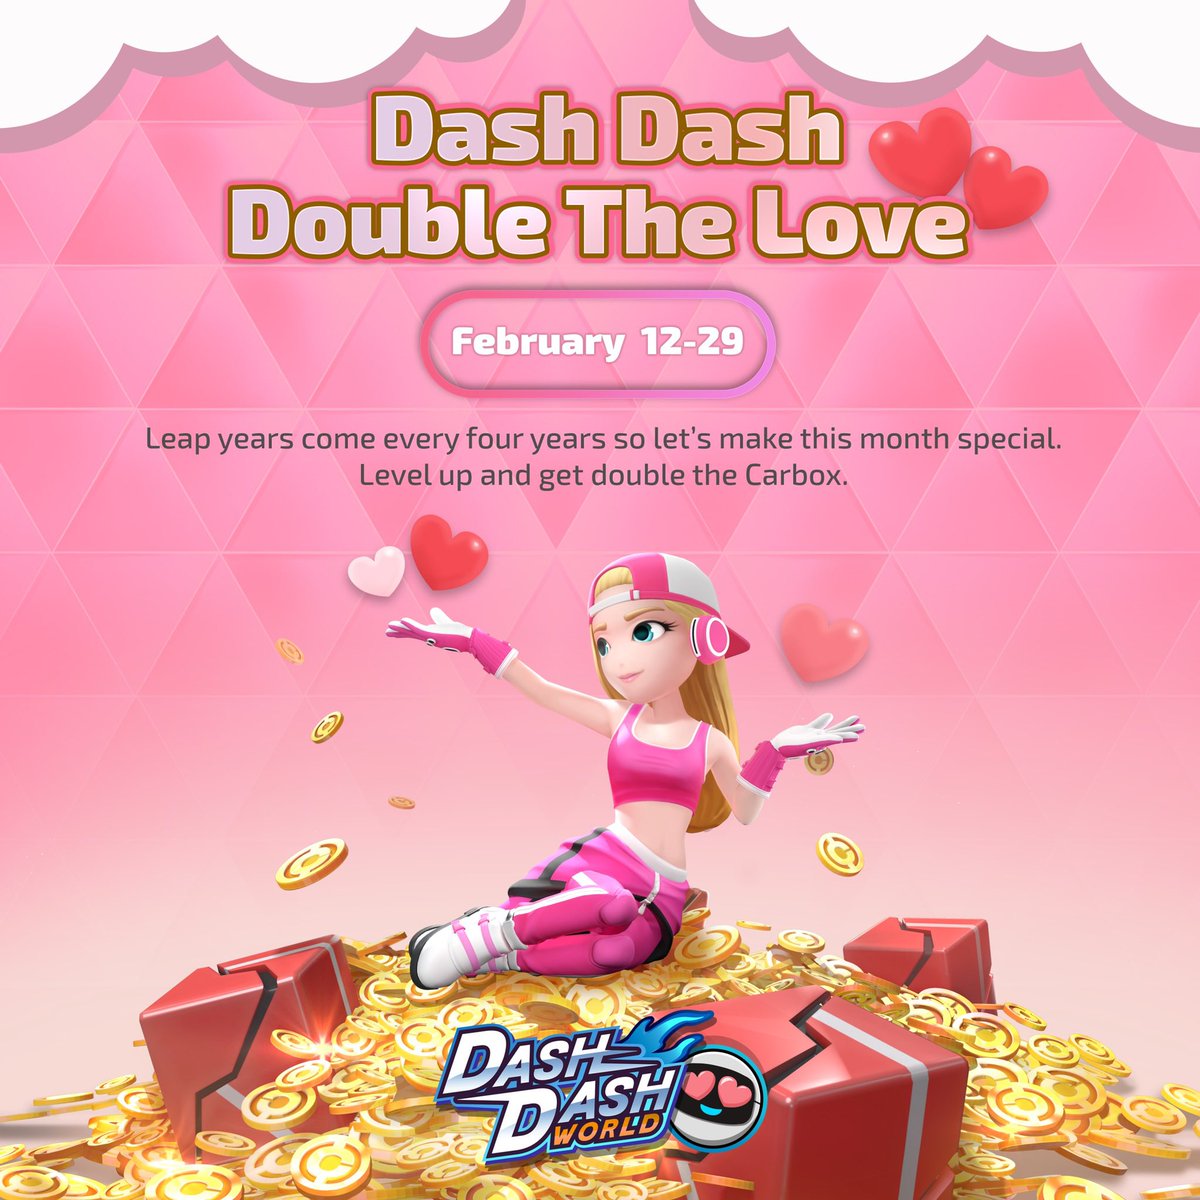 💗Double up on the love this February!💗

😎Level up and get x2 Carboxes🍫🍫

#DashDashWorld #OpenBeta #OculusQuest #OculusLink #OculusRift #PSVR #SteamVR #alpha #beta #test #GamersUnite #SupportSmallStreamers #indiedev #indiegame #vr #ar #ux #ui #racing #kartracing #womeninvr